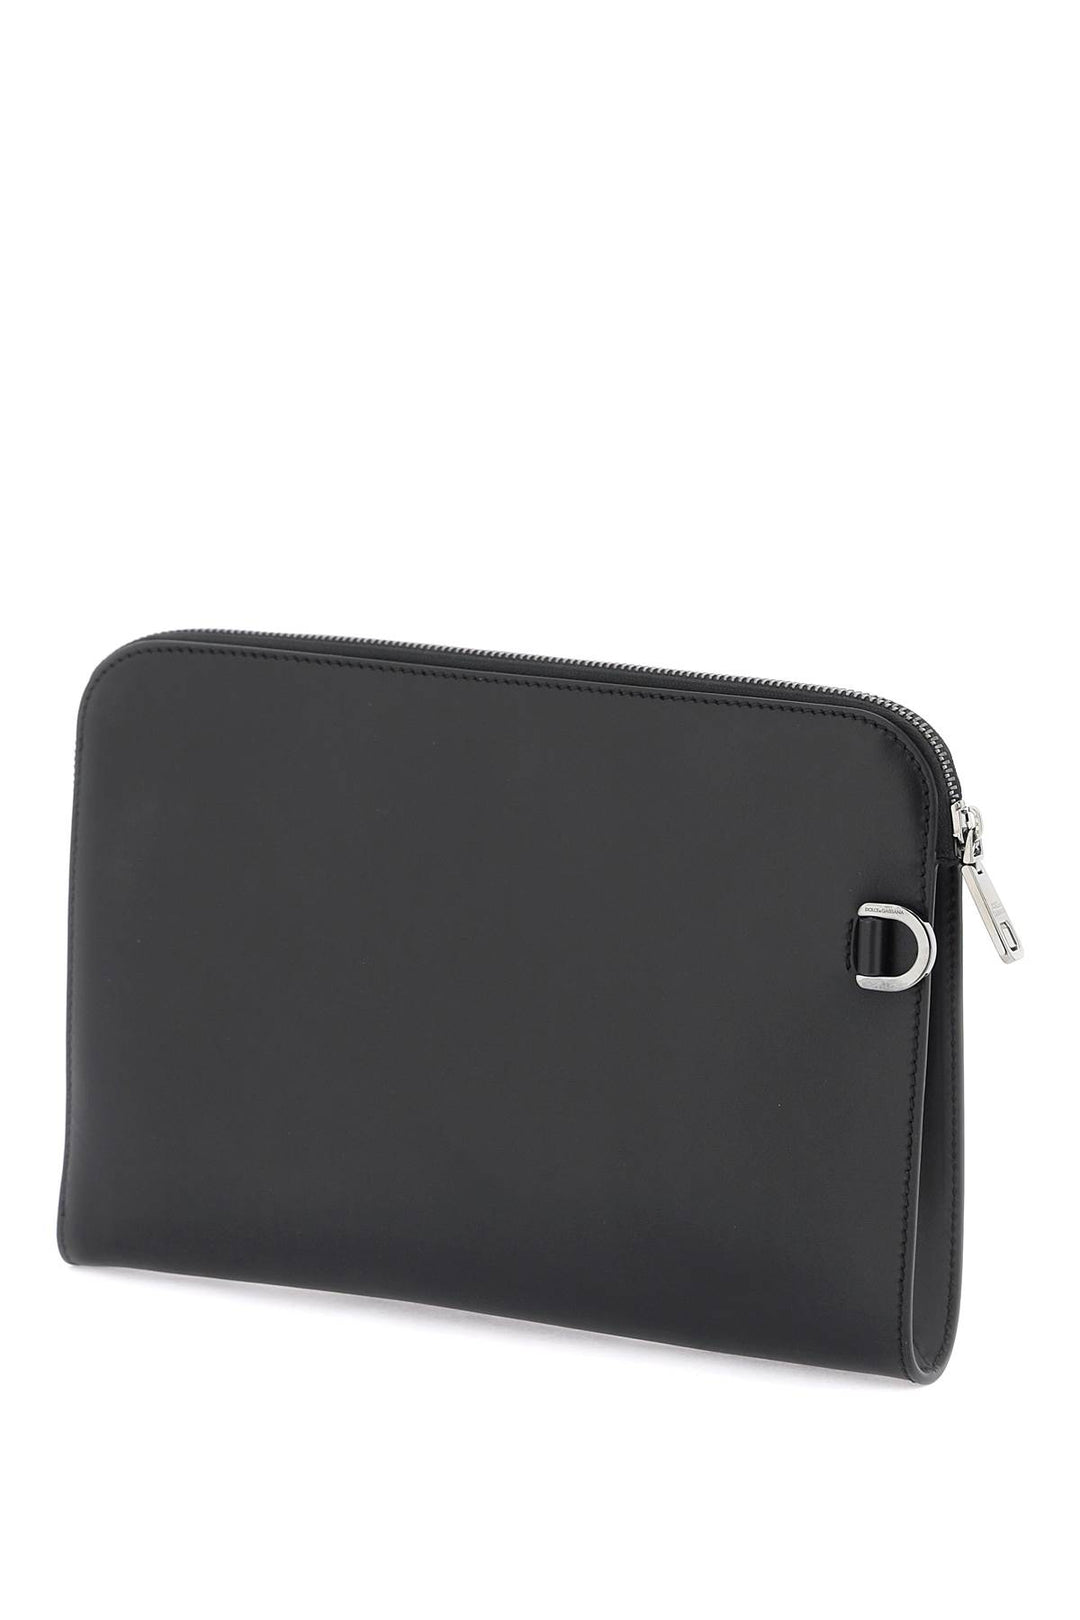 Dolce & Gabbana Pouch With Embossed Logo   Nero